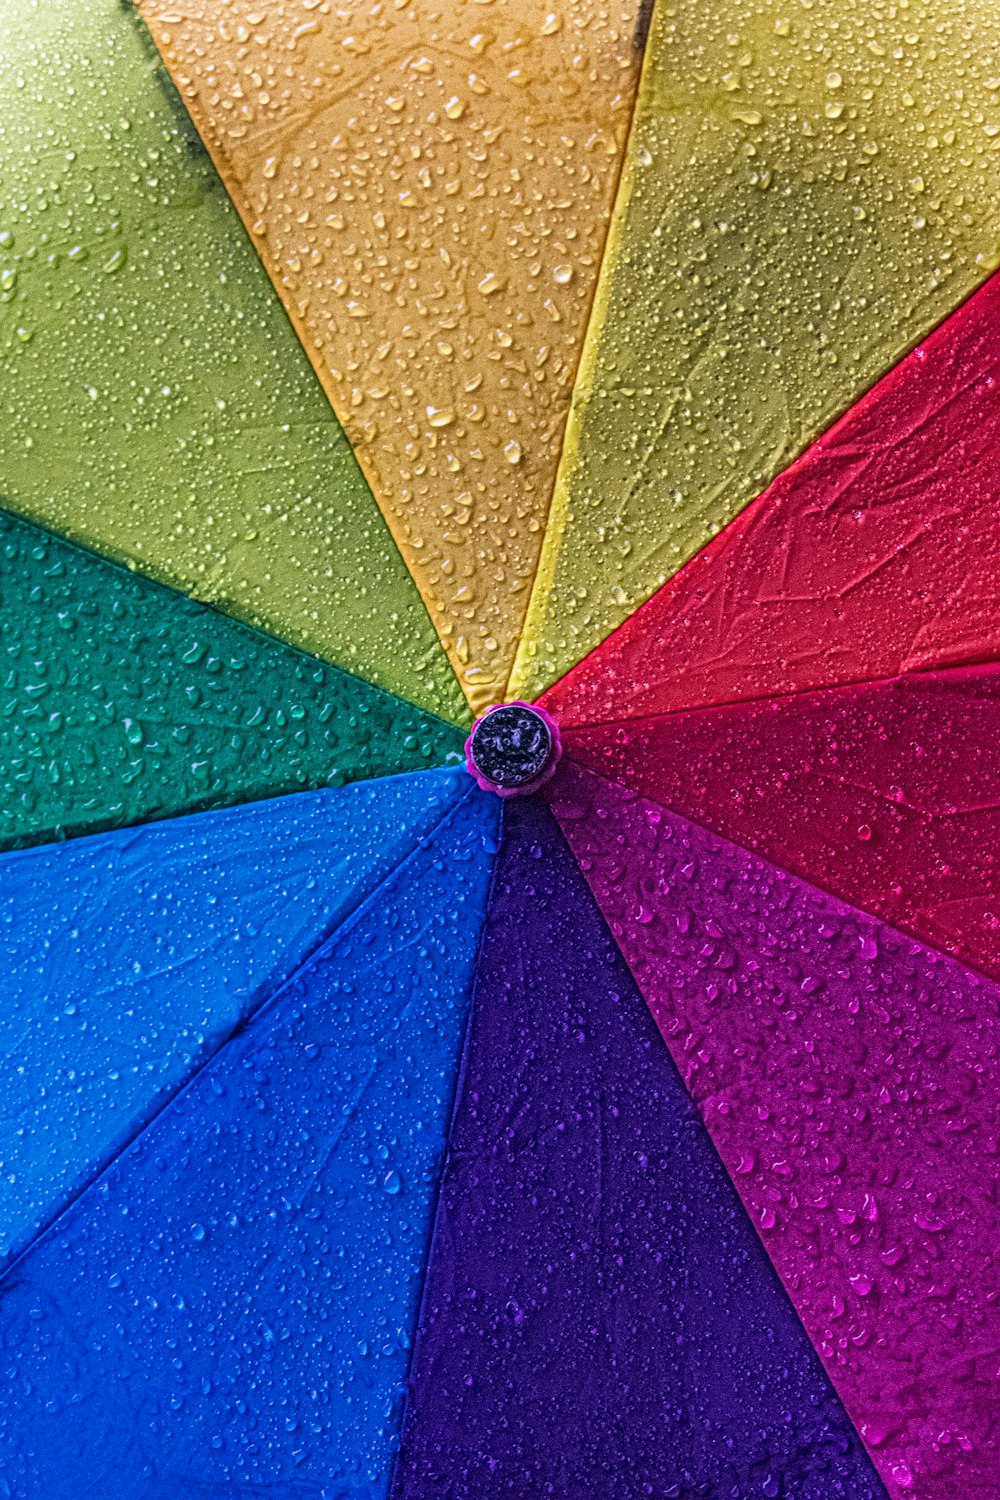 a multicolored umbrella with drops of water on it